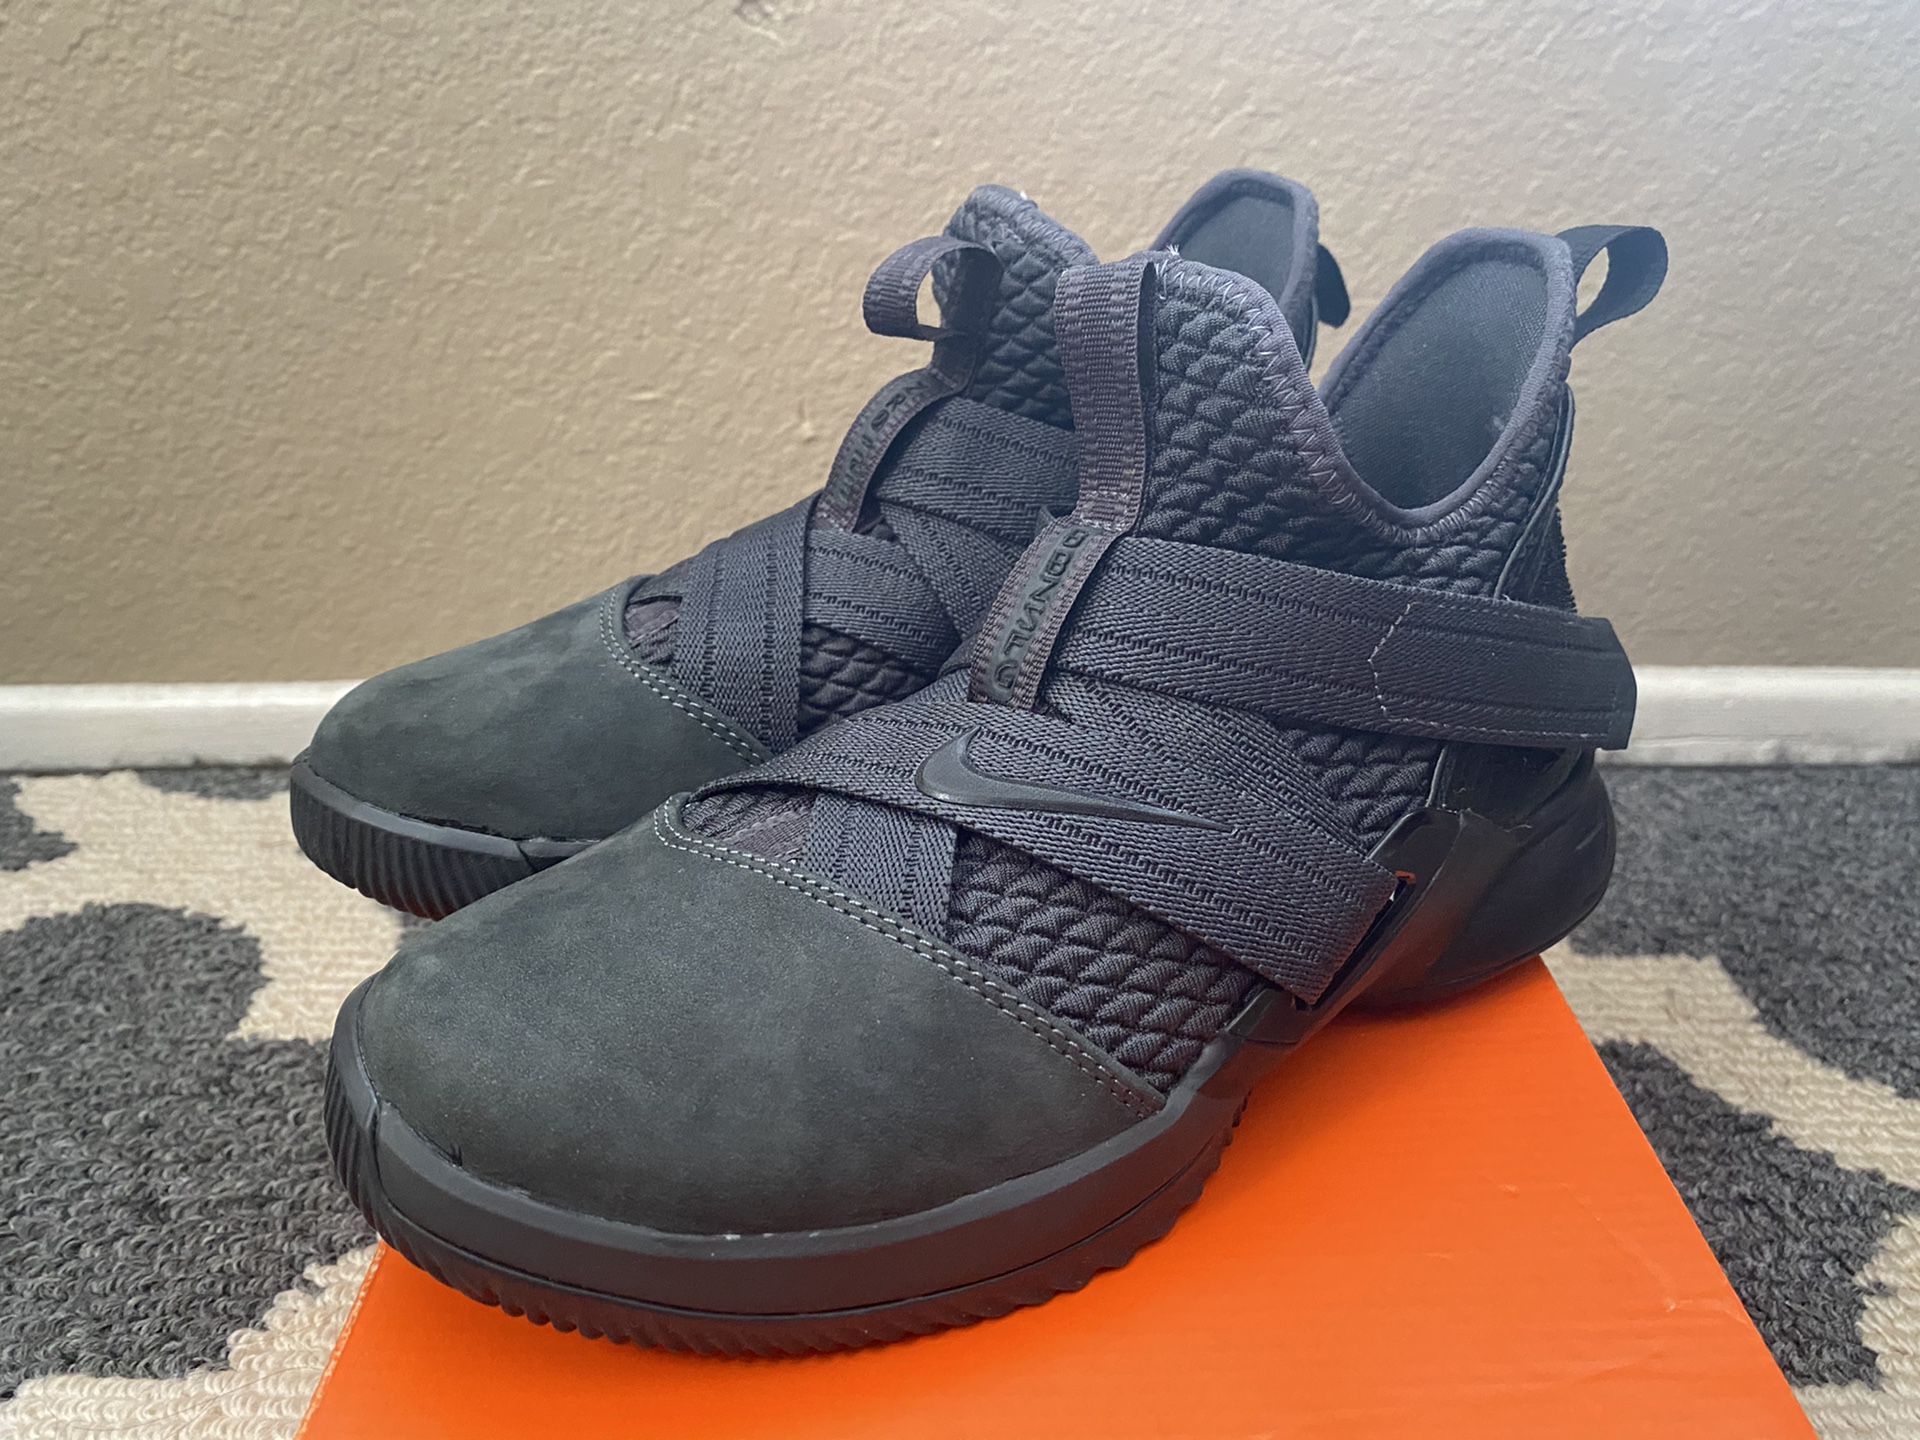 New Nike Lebron Soldier XII Kids GS 4Y Basketball Shoes AO2910-002 Triple Black